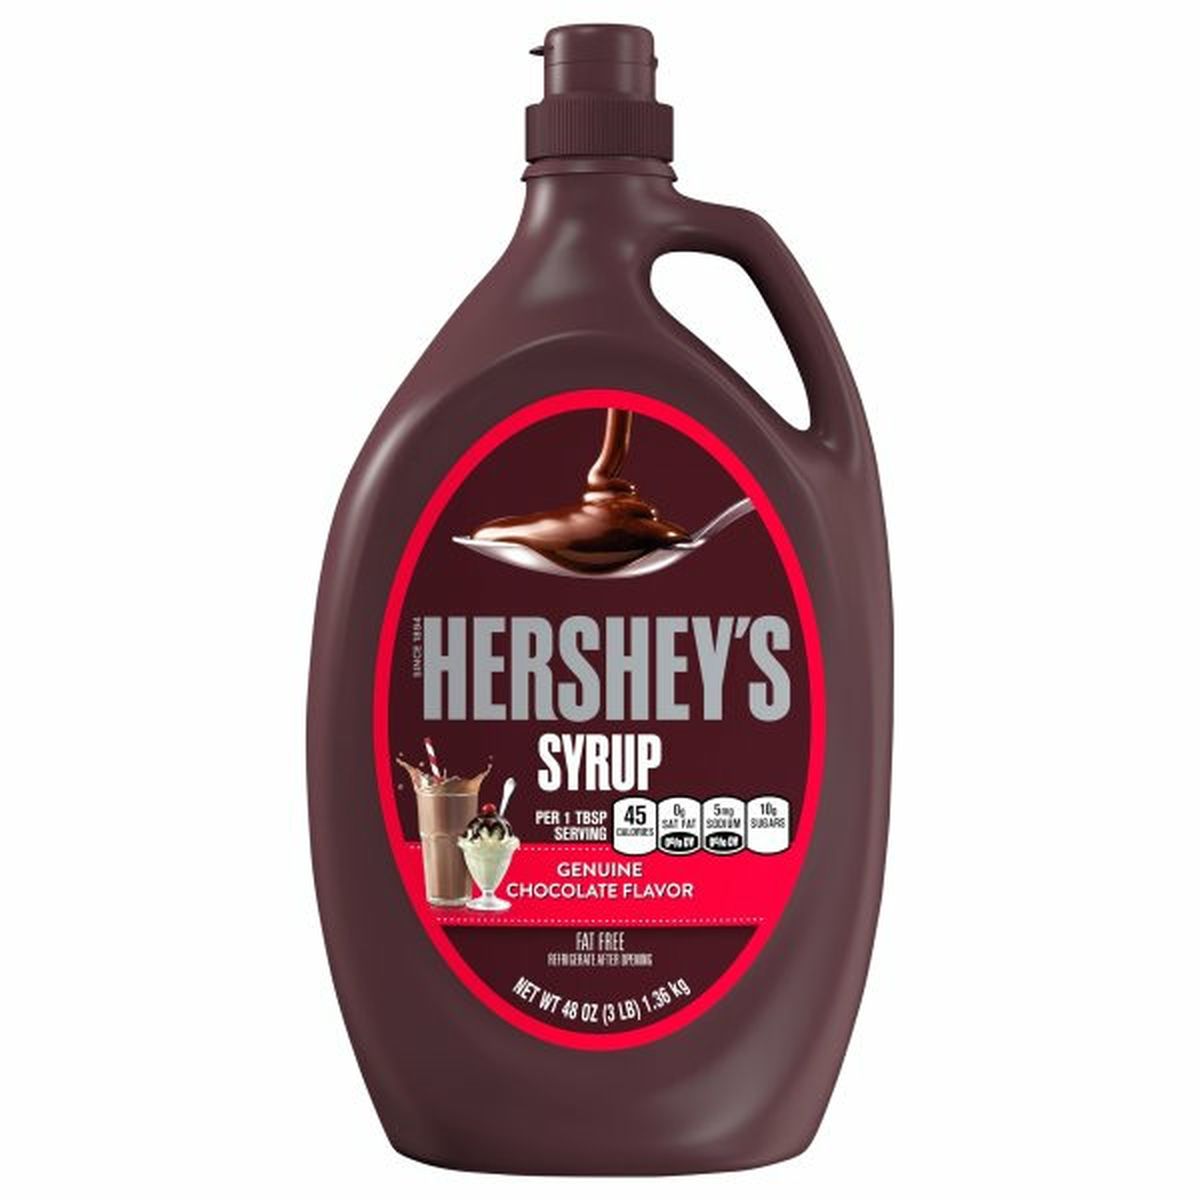 Calories in Hershey Syrup, Fat Free, Genuine Chocolate Flavor